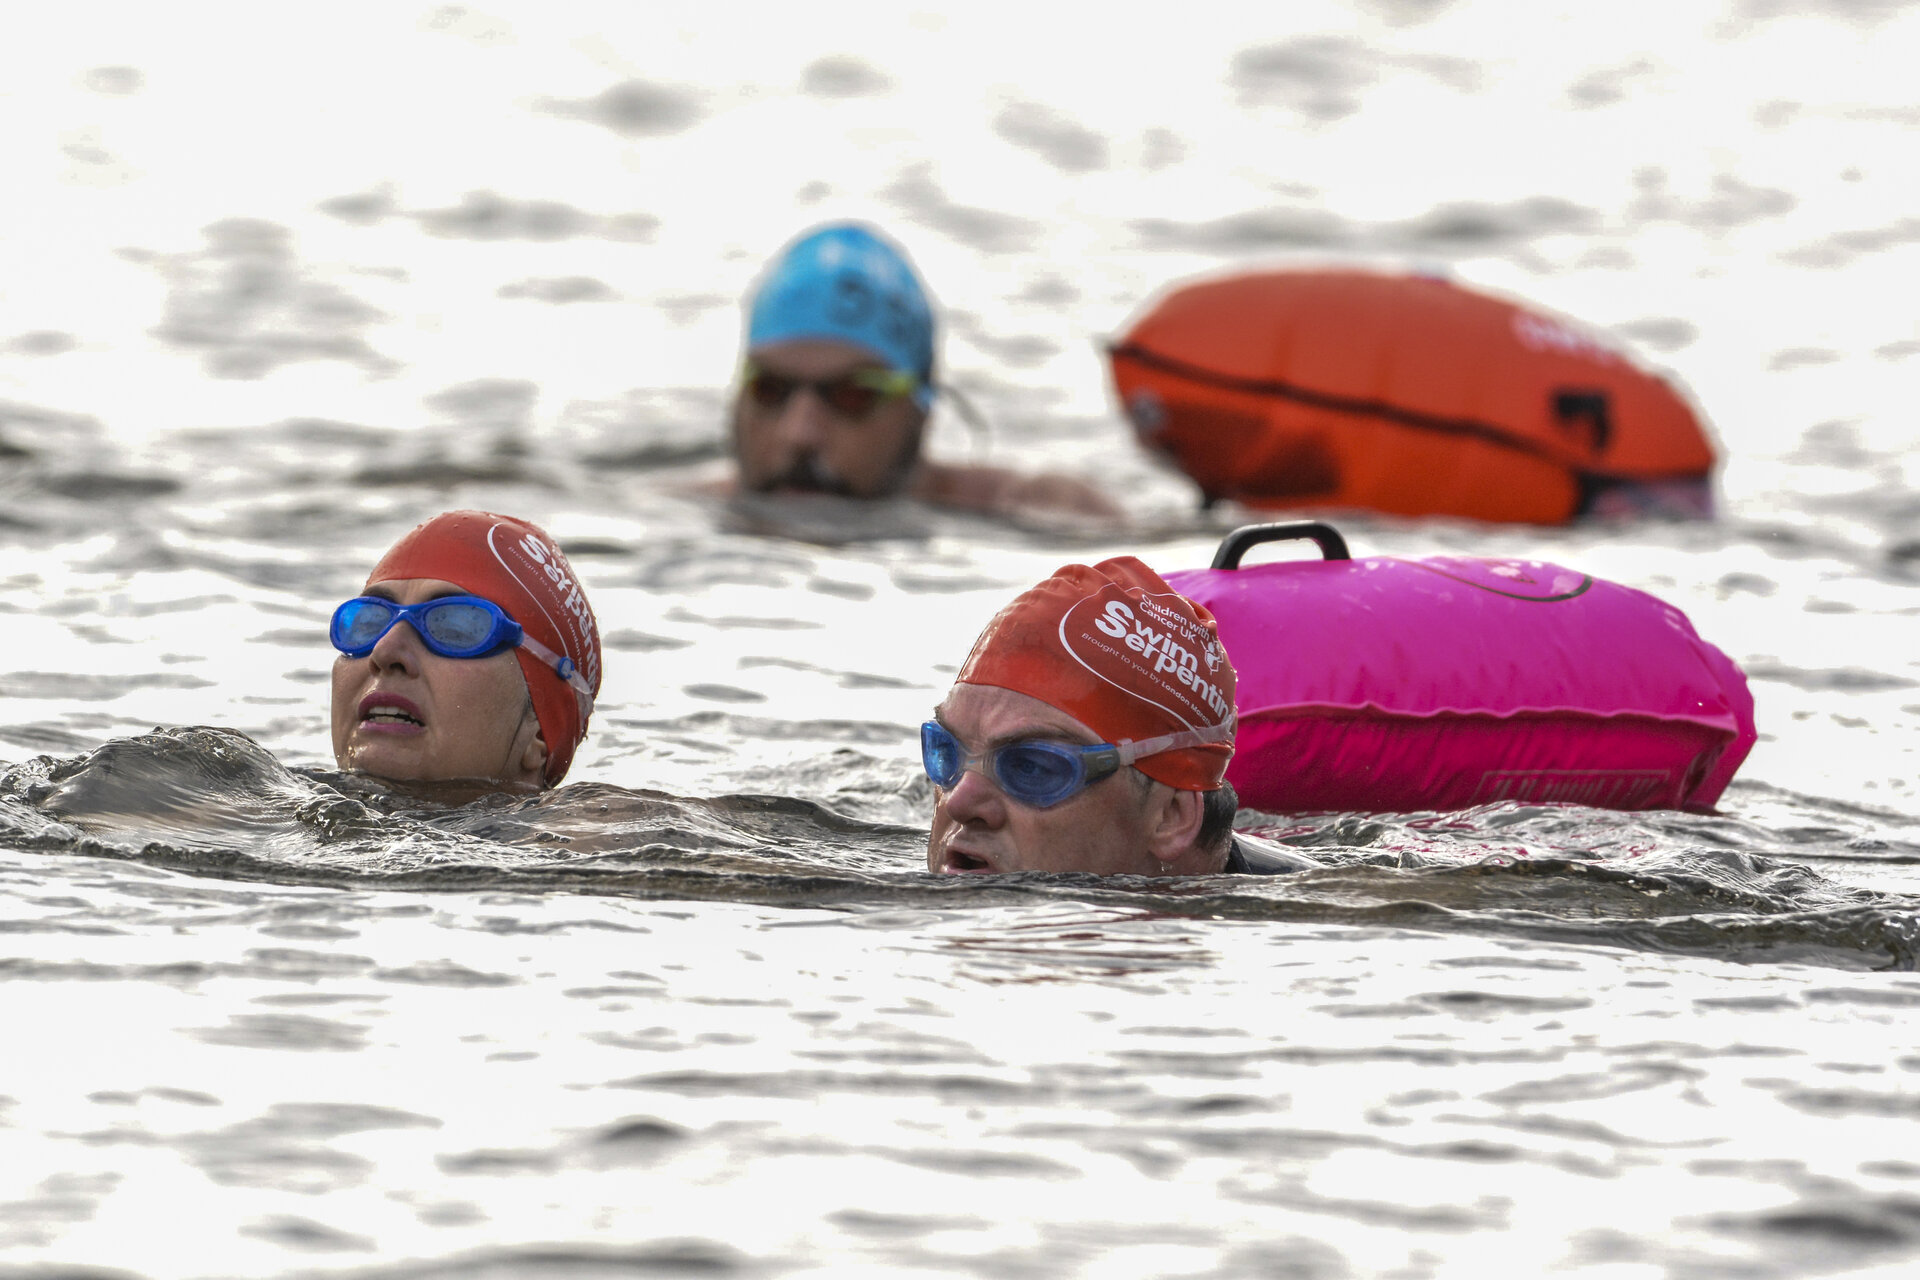 Swimmers in the water at the Swim Serpentine event on 18 September